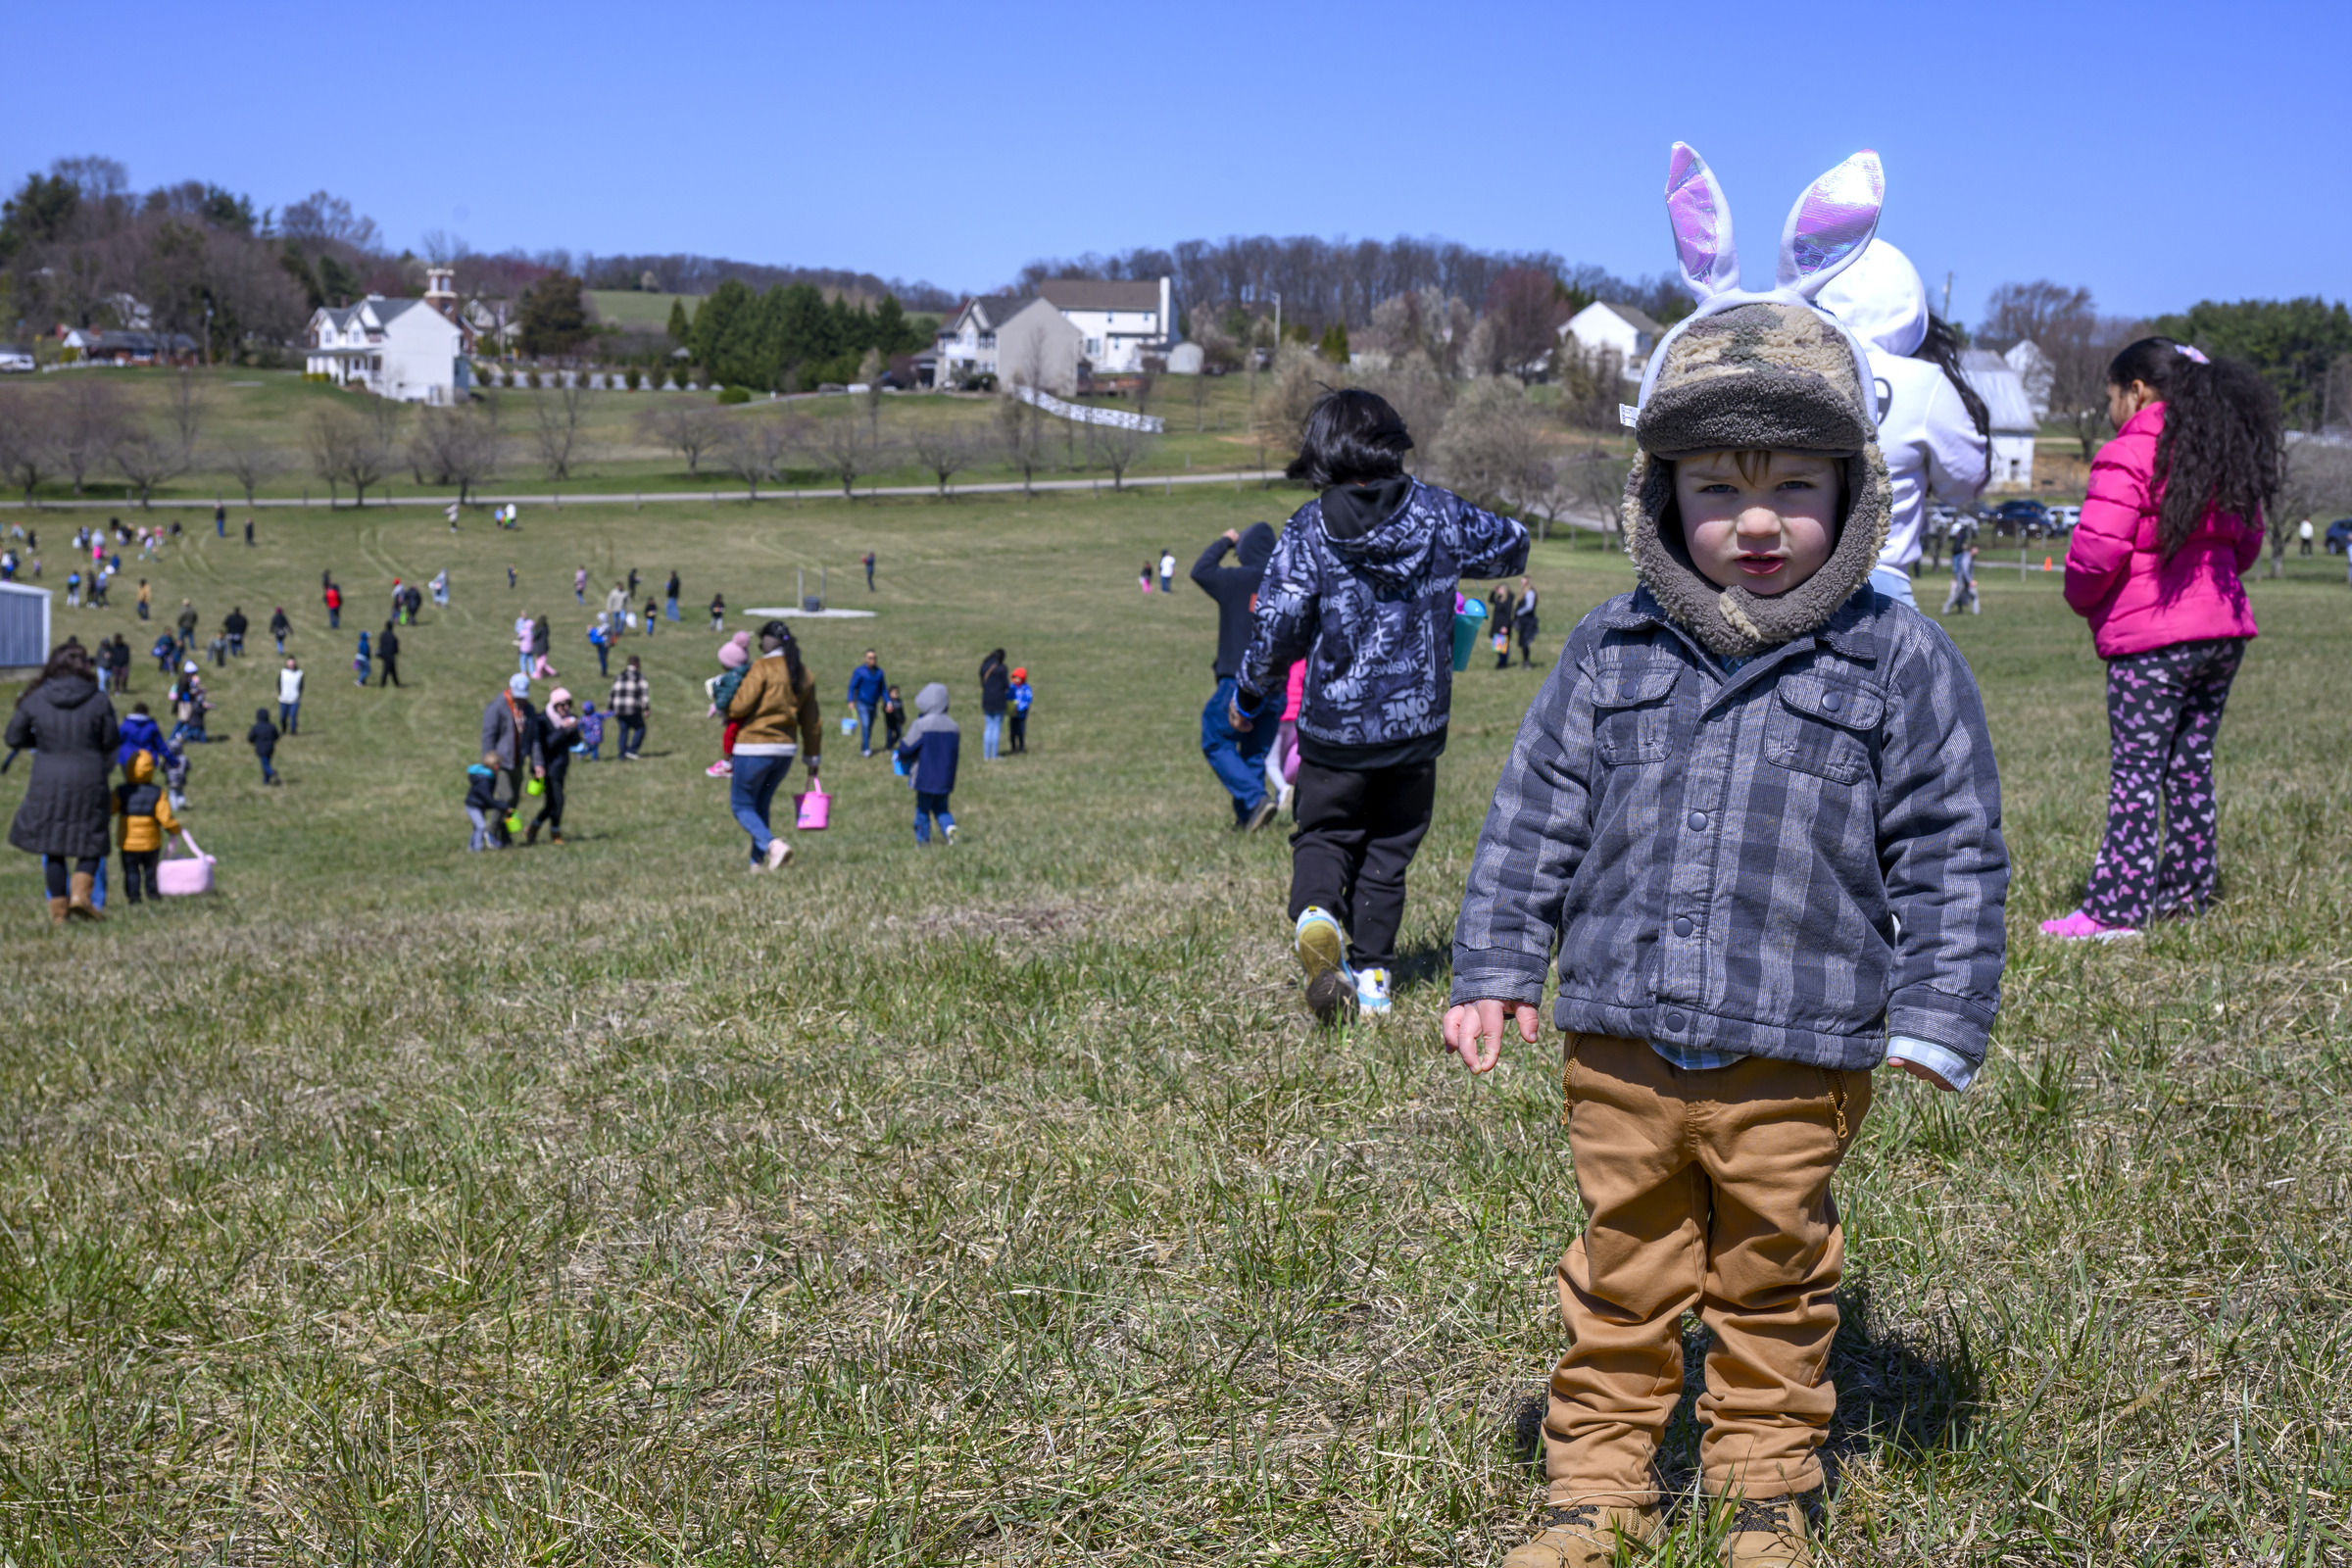 T.J. Burkins, 3, wears rabbit ears while searching for Easter eggs during the Coppermine Eggstravaganza at Cascade Park in Hampstead. (Thomas Walker/Freelance)